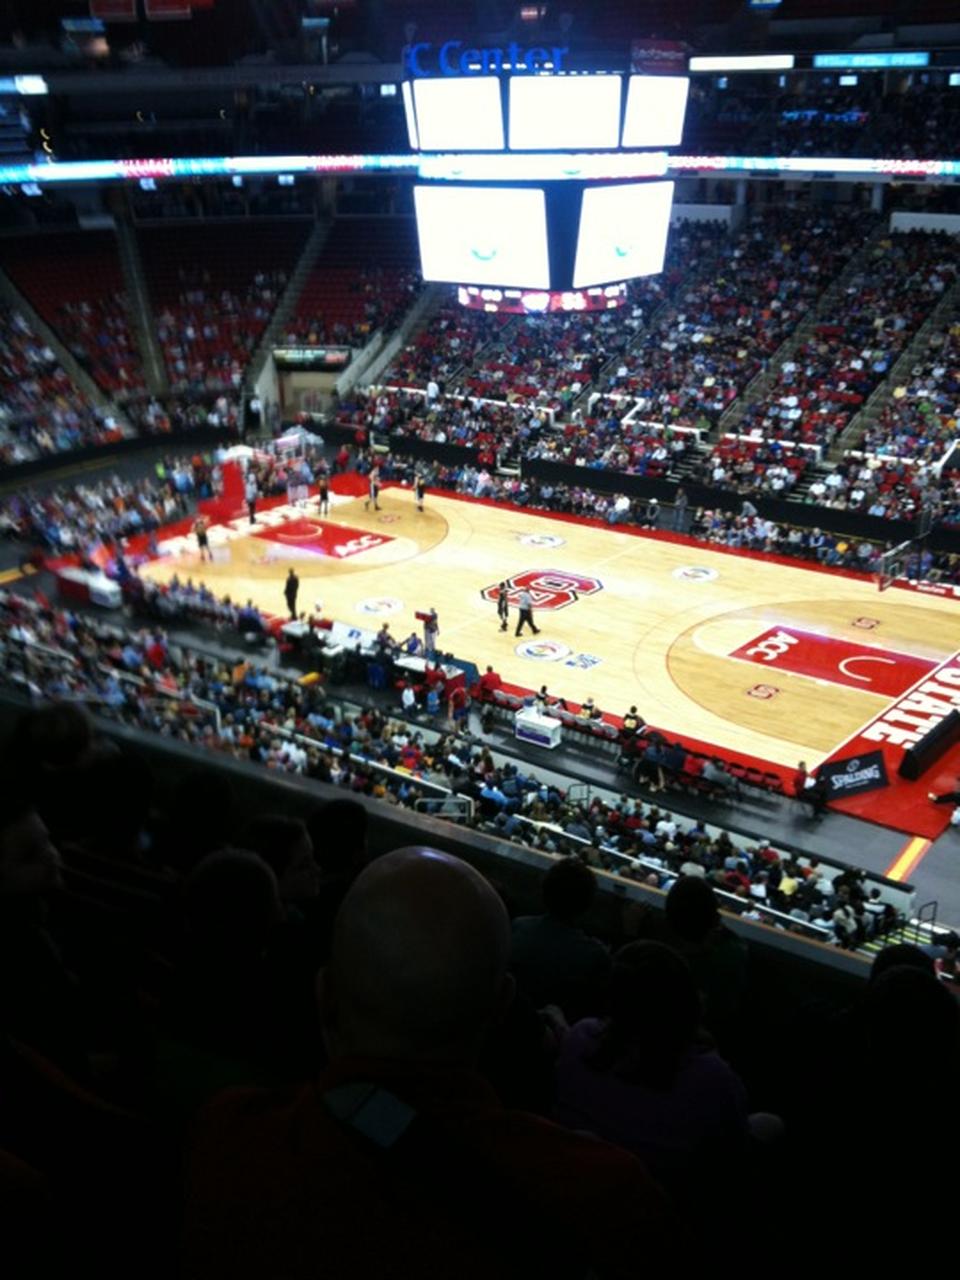 section 217 seat view  for basketball - pnc arena